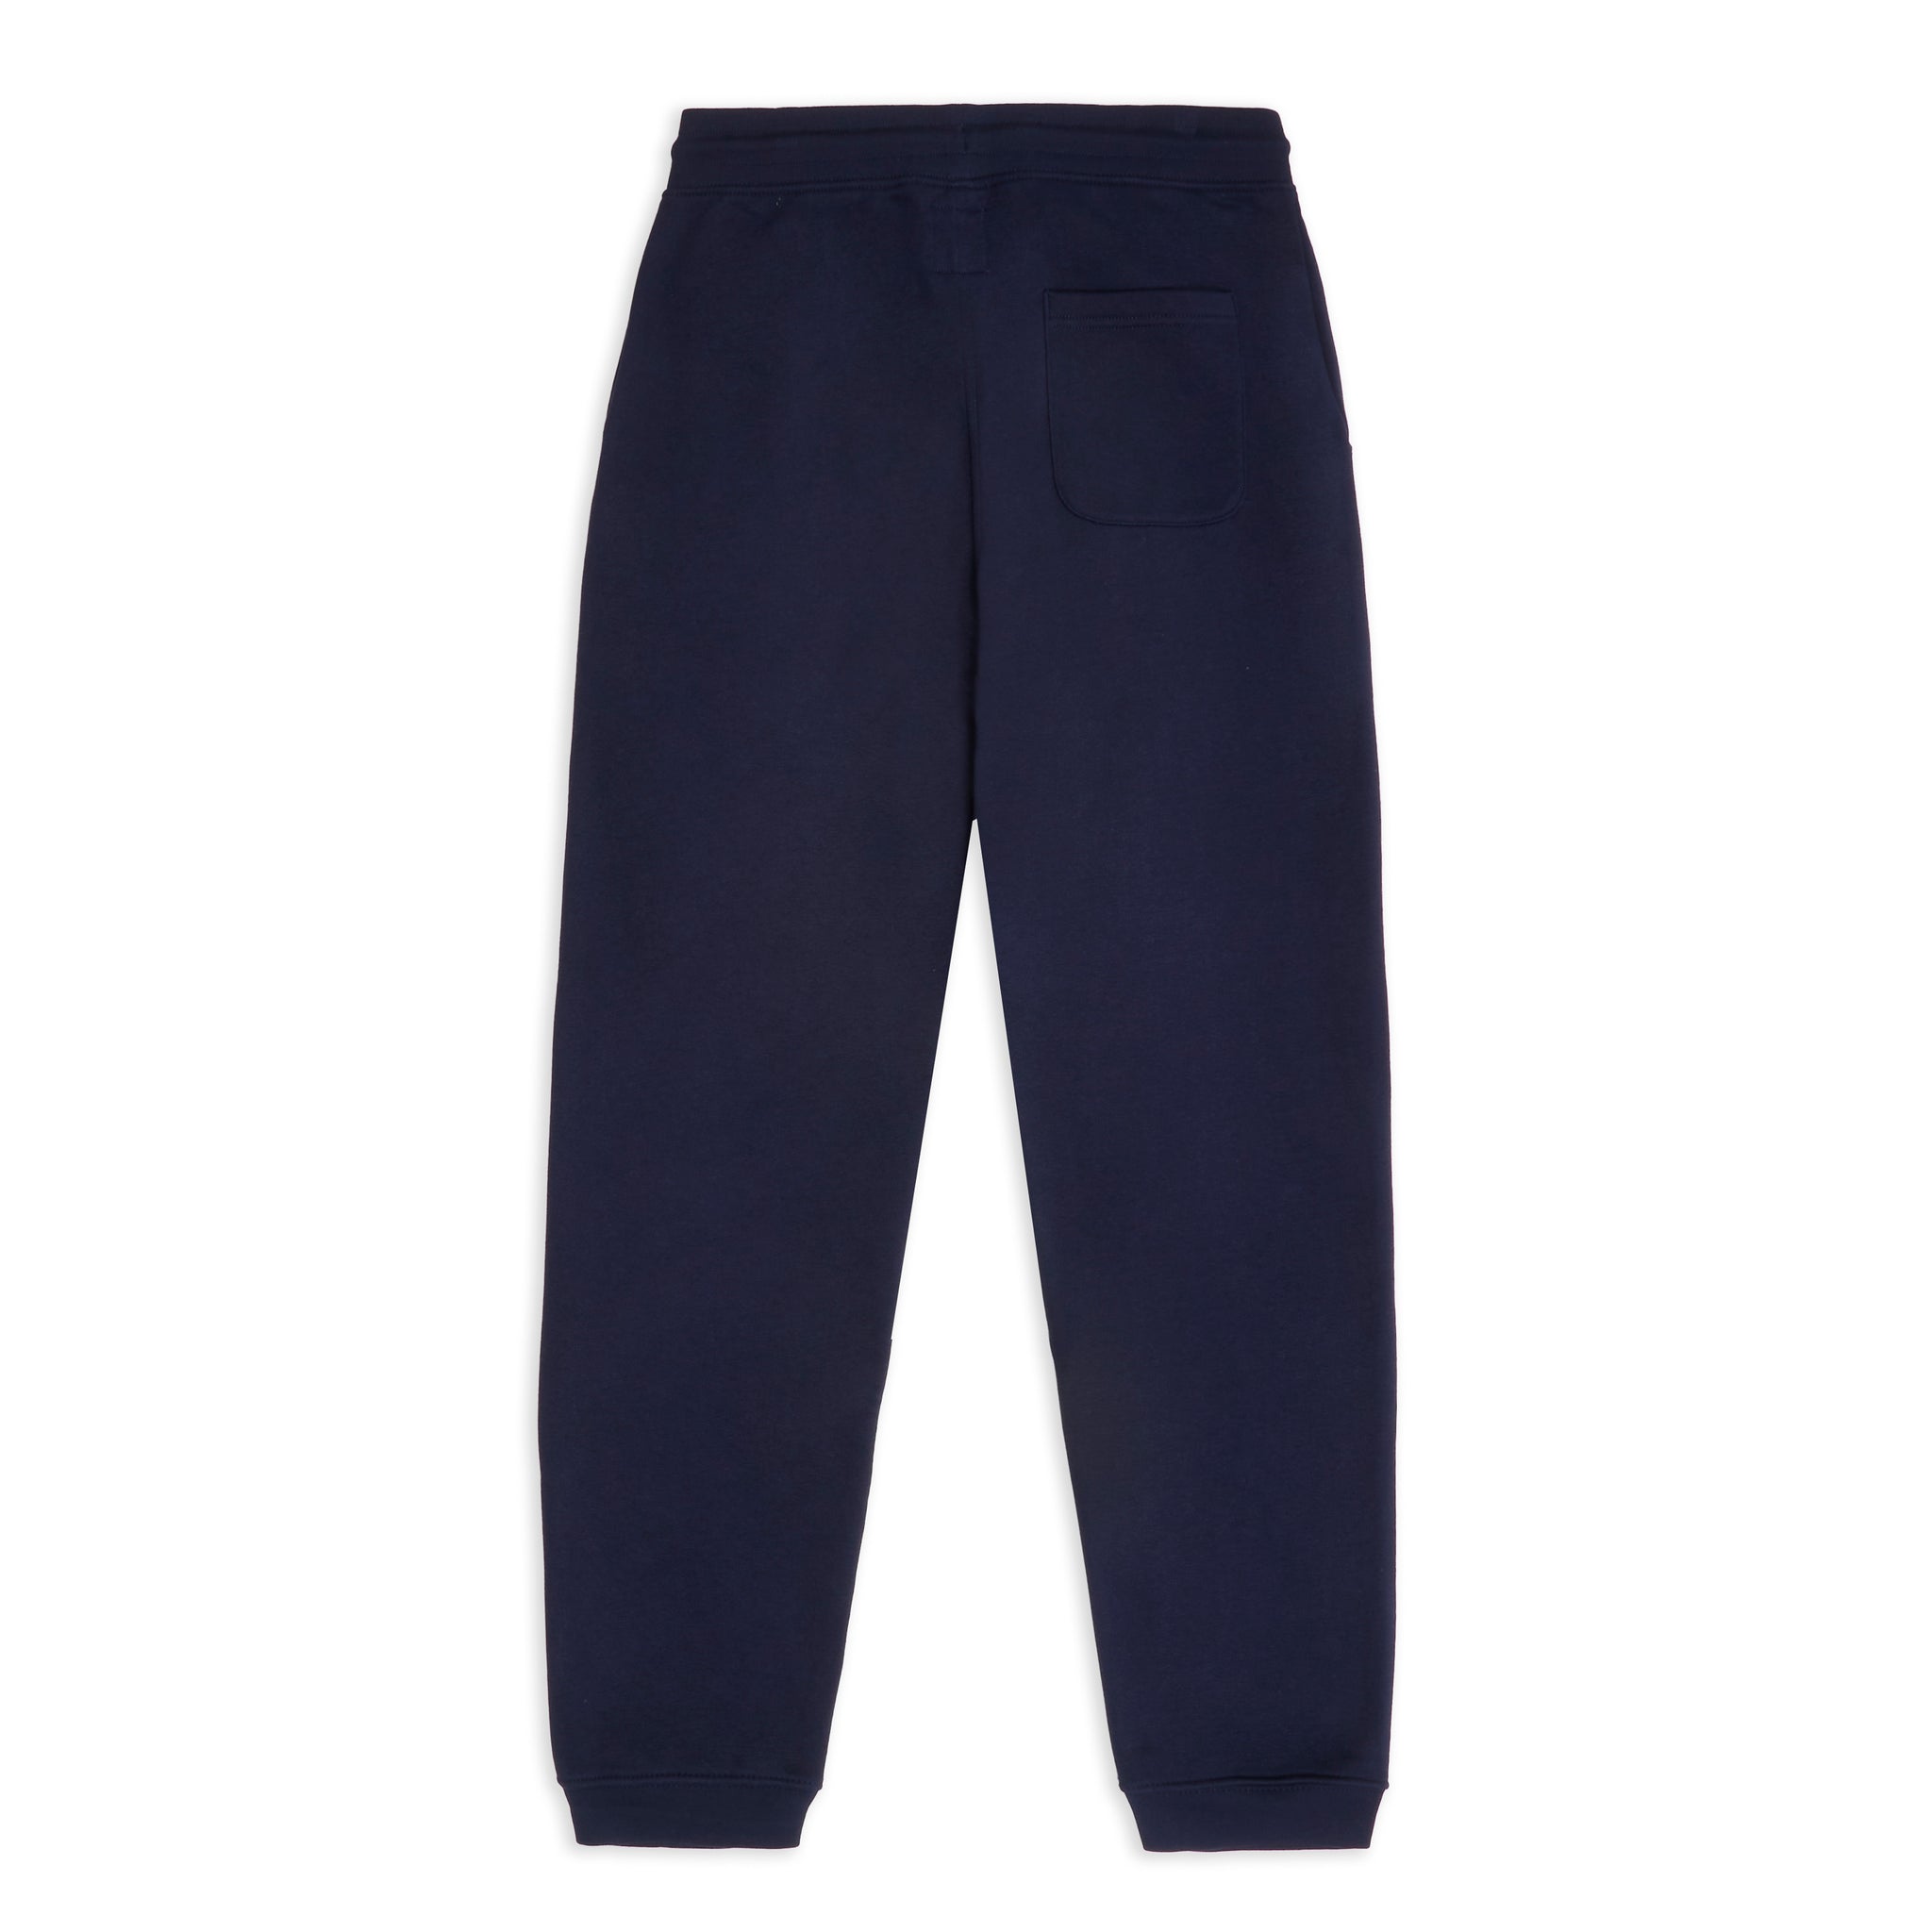 Classic Navy 30 Year™ Tracksuits